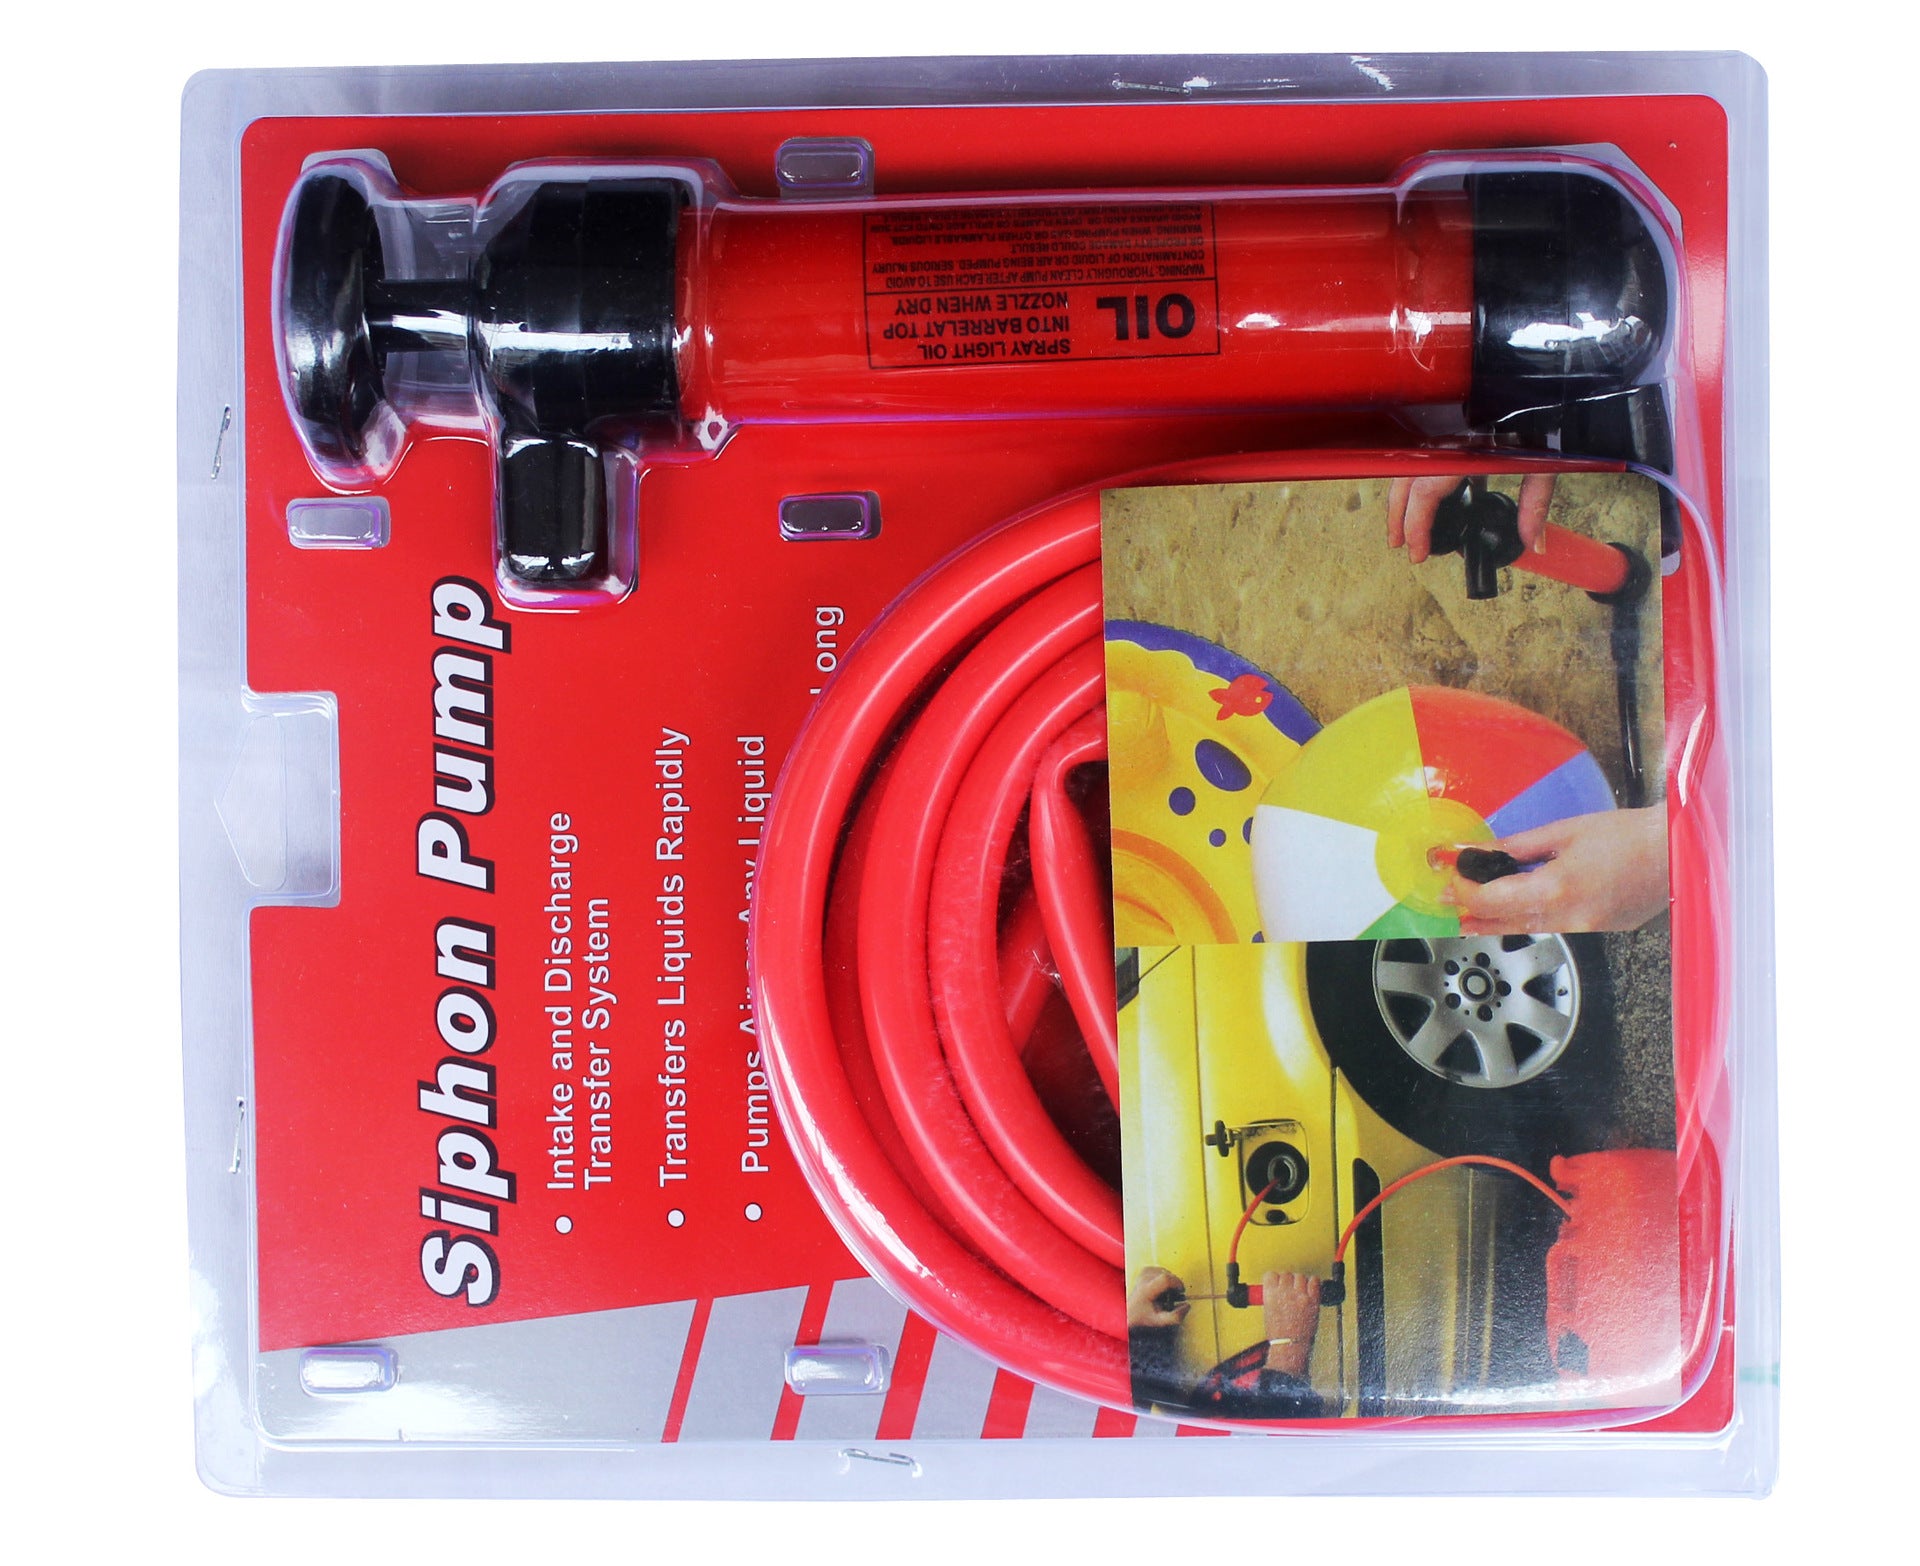 Firebrick High-end car special suction pipe oil absorber (Red)